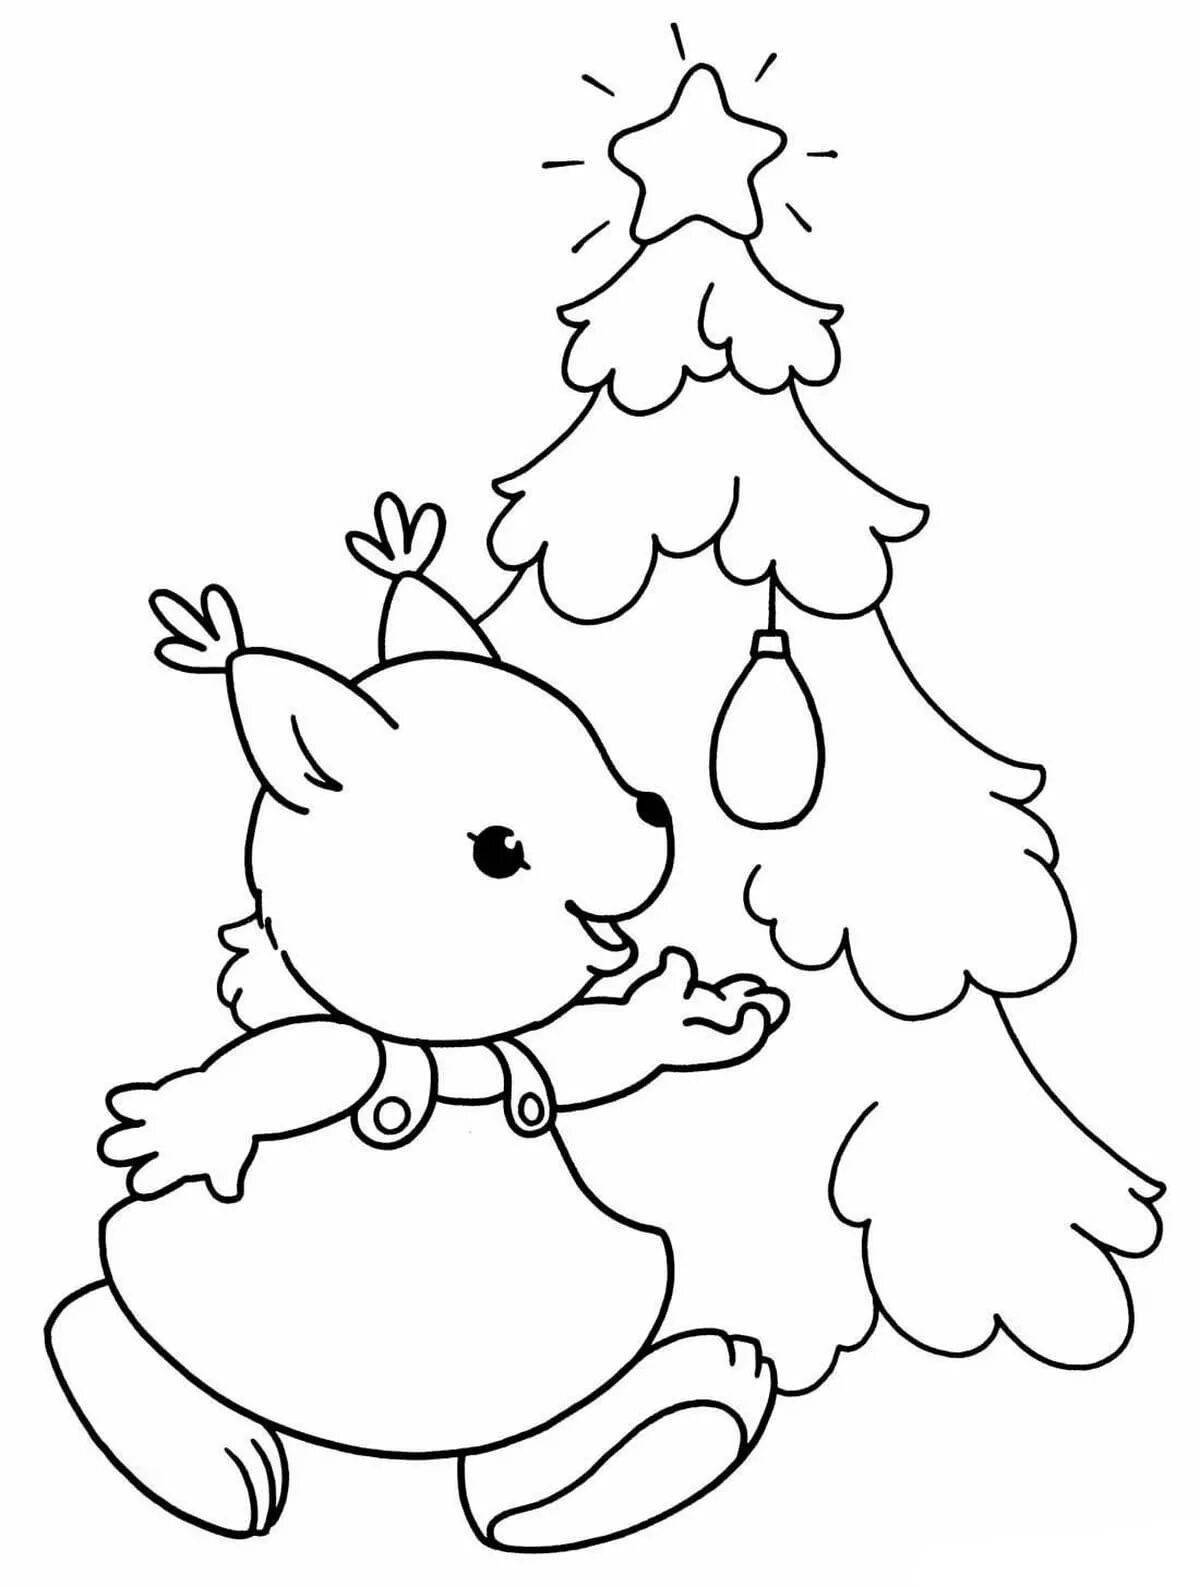 Playful Christmas coloring book for kids